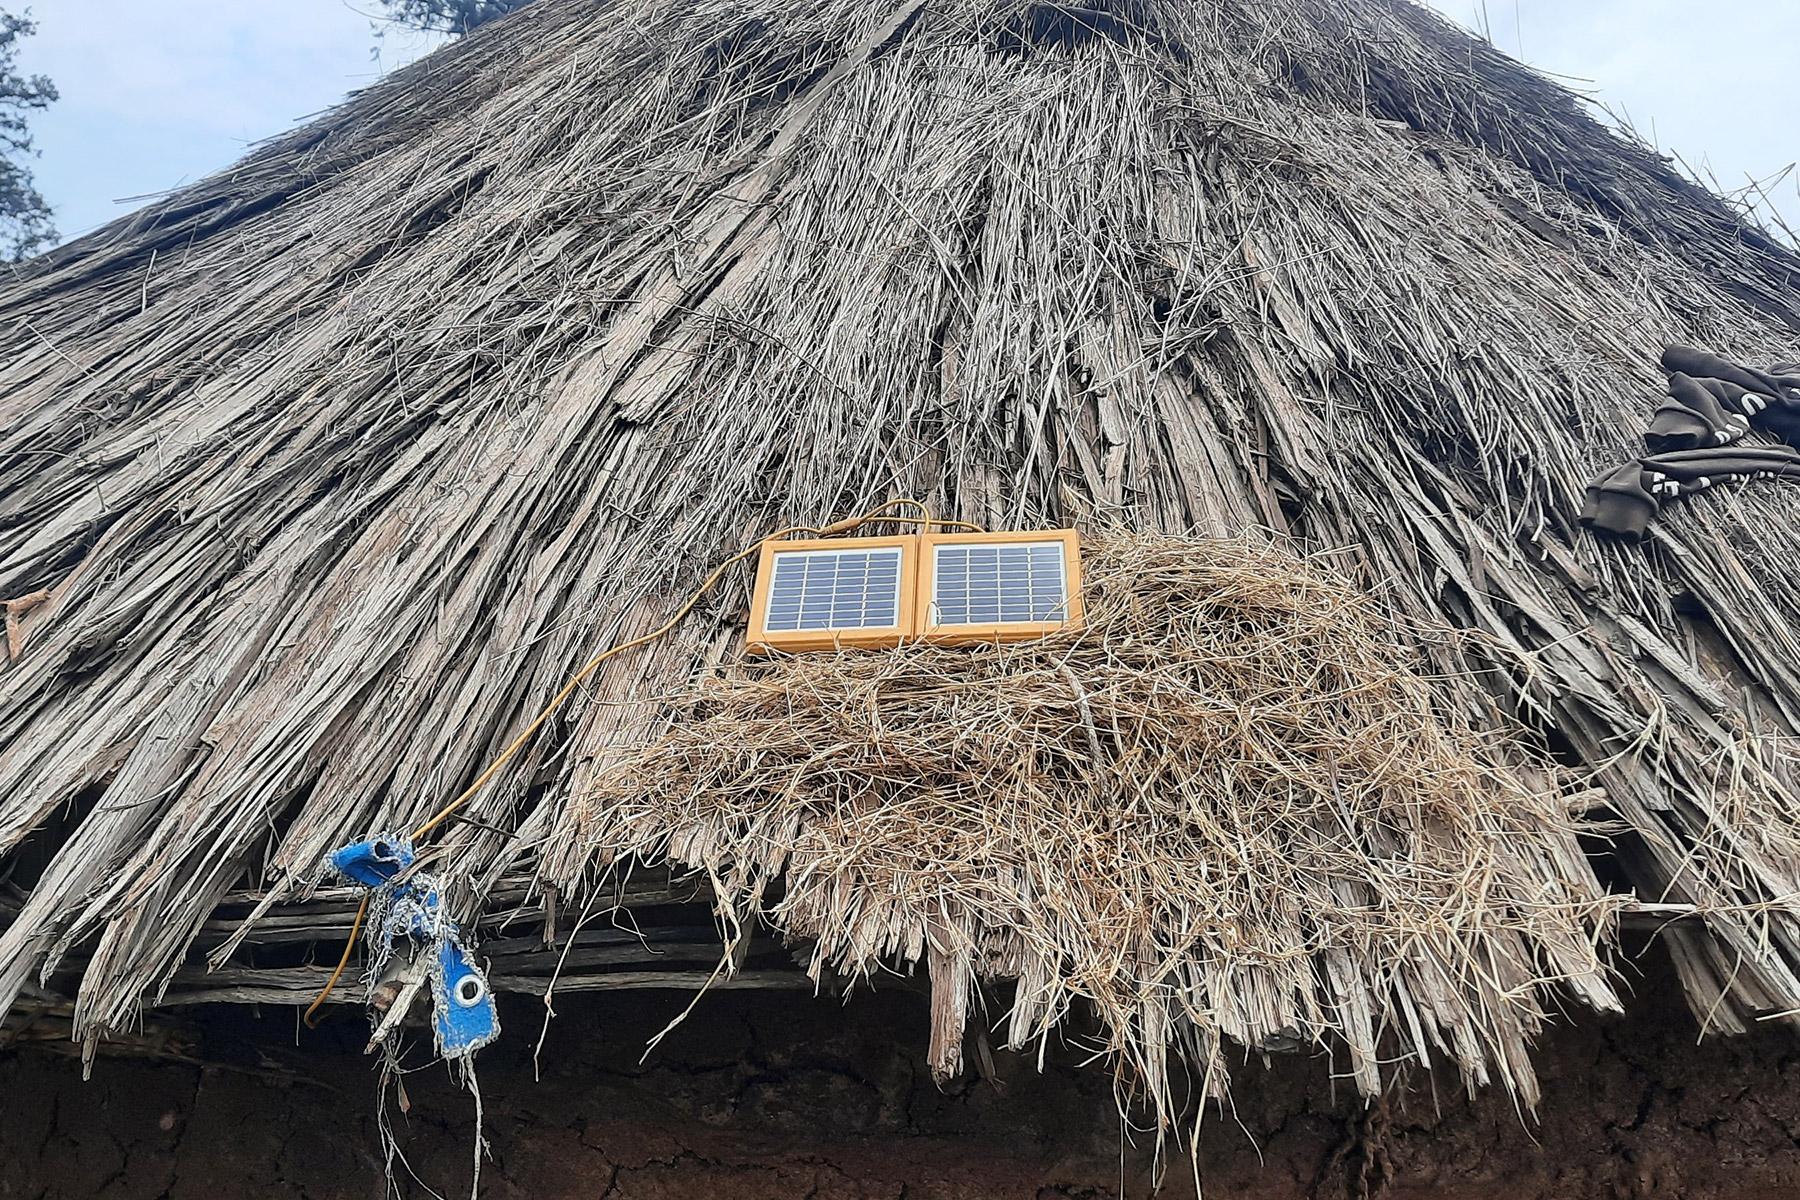 A photovoltaic panel on the roof of a tukul, a traditional clay house in Rukiye’s community. Photo: LWF/ S. Gebreyes